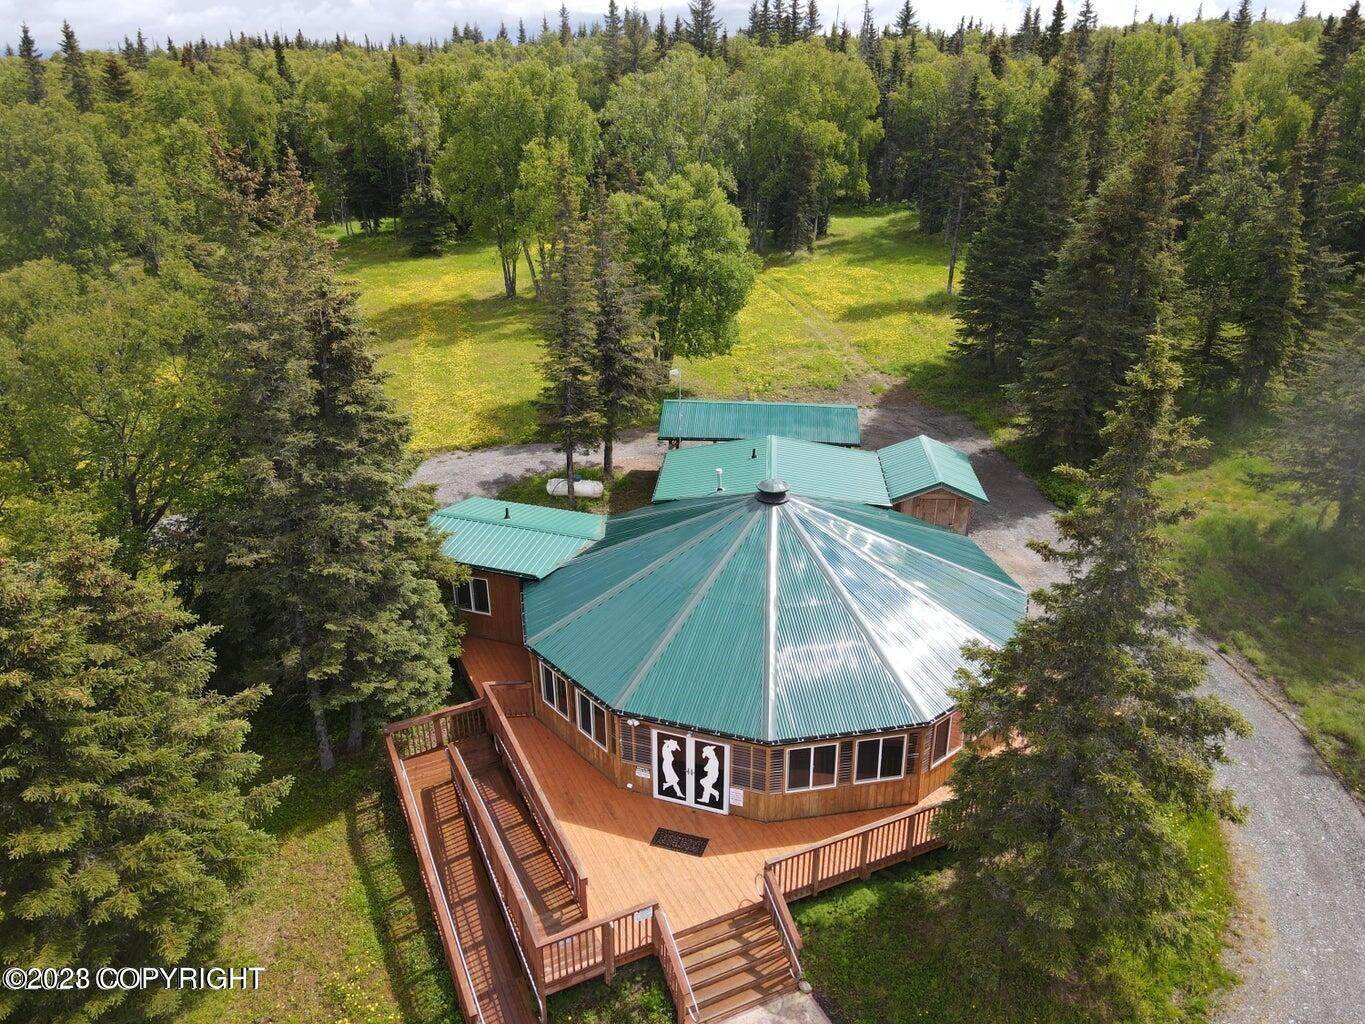 Business Opportunity for Sale at 13364 Sterling Highway Ninilchik, Alaska 99639 United States